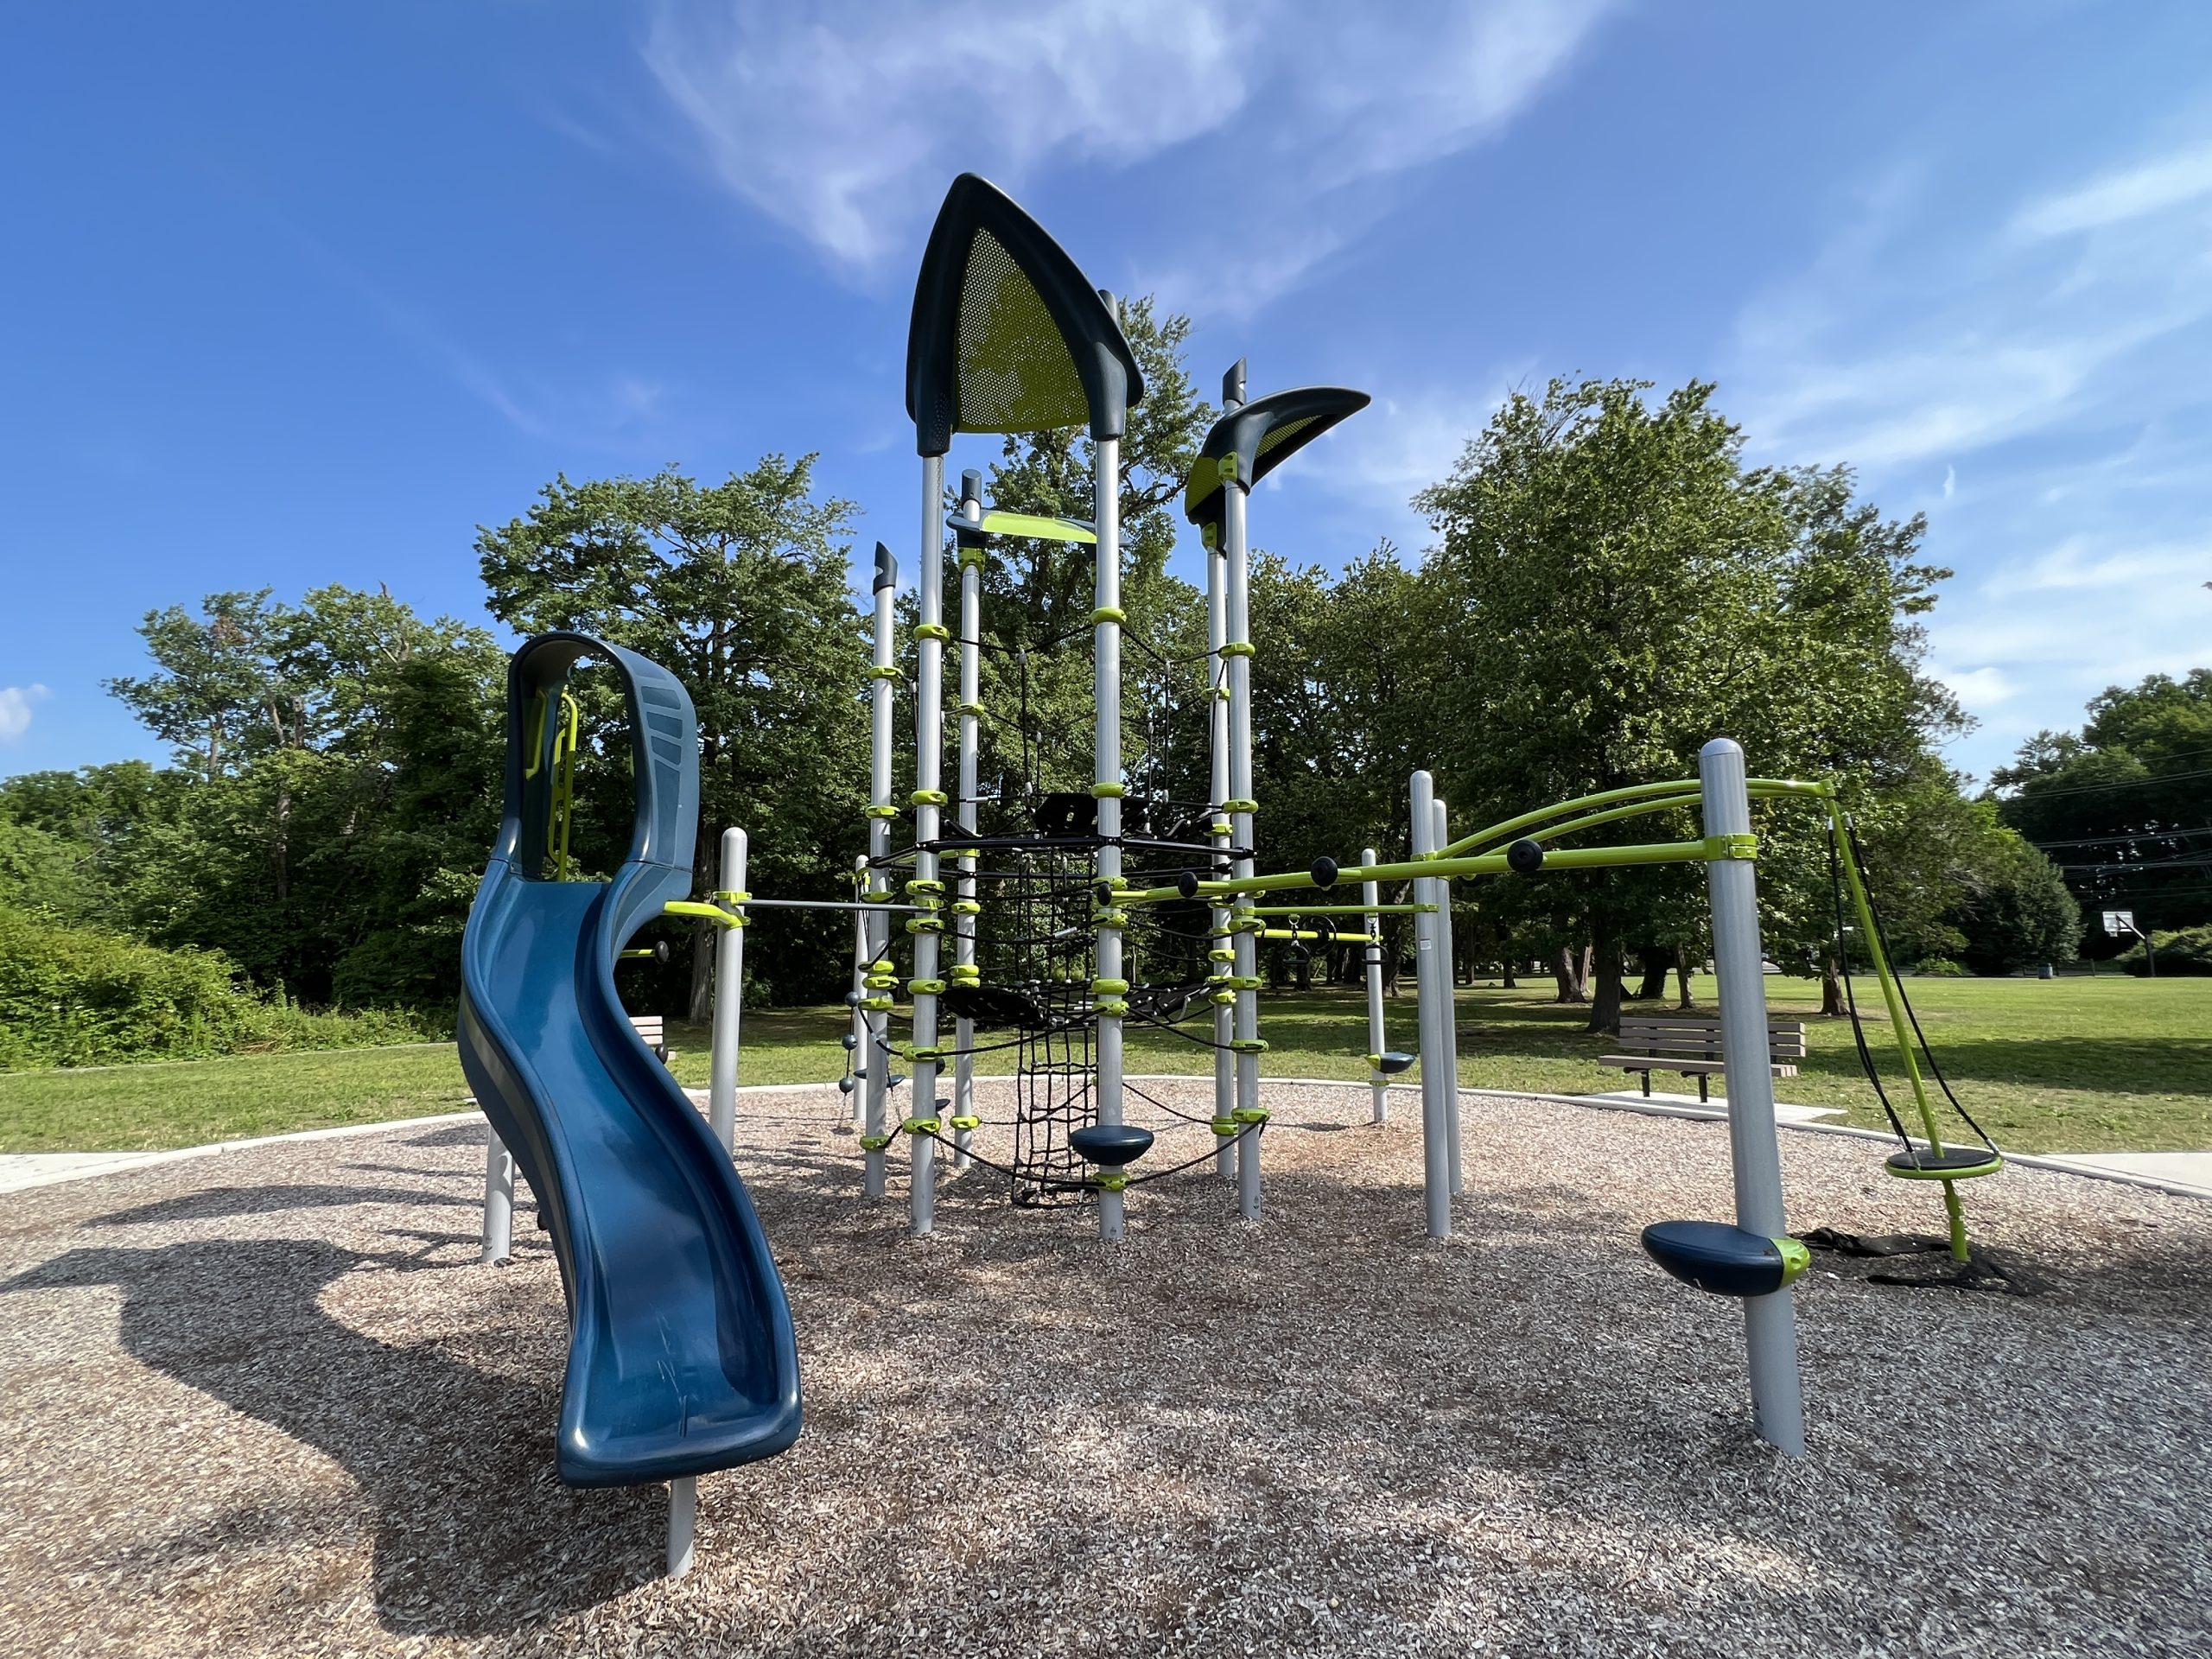 Climbing tower Playground at Berlin Park Playgrounds in Berlin New Jersey horizontal curvy slide view